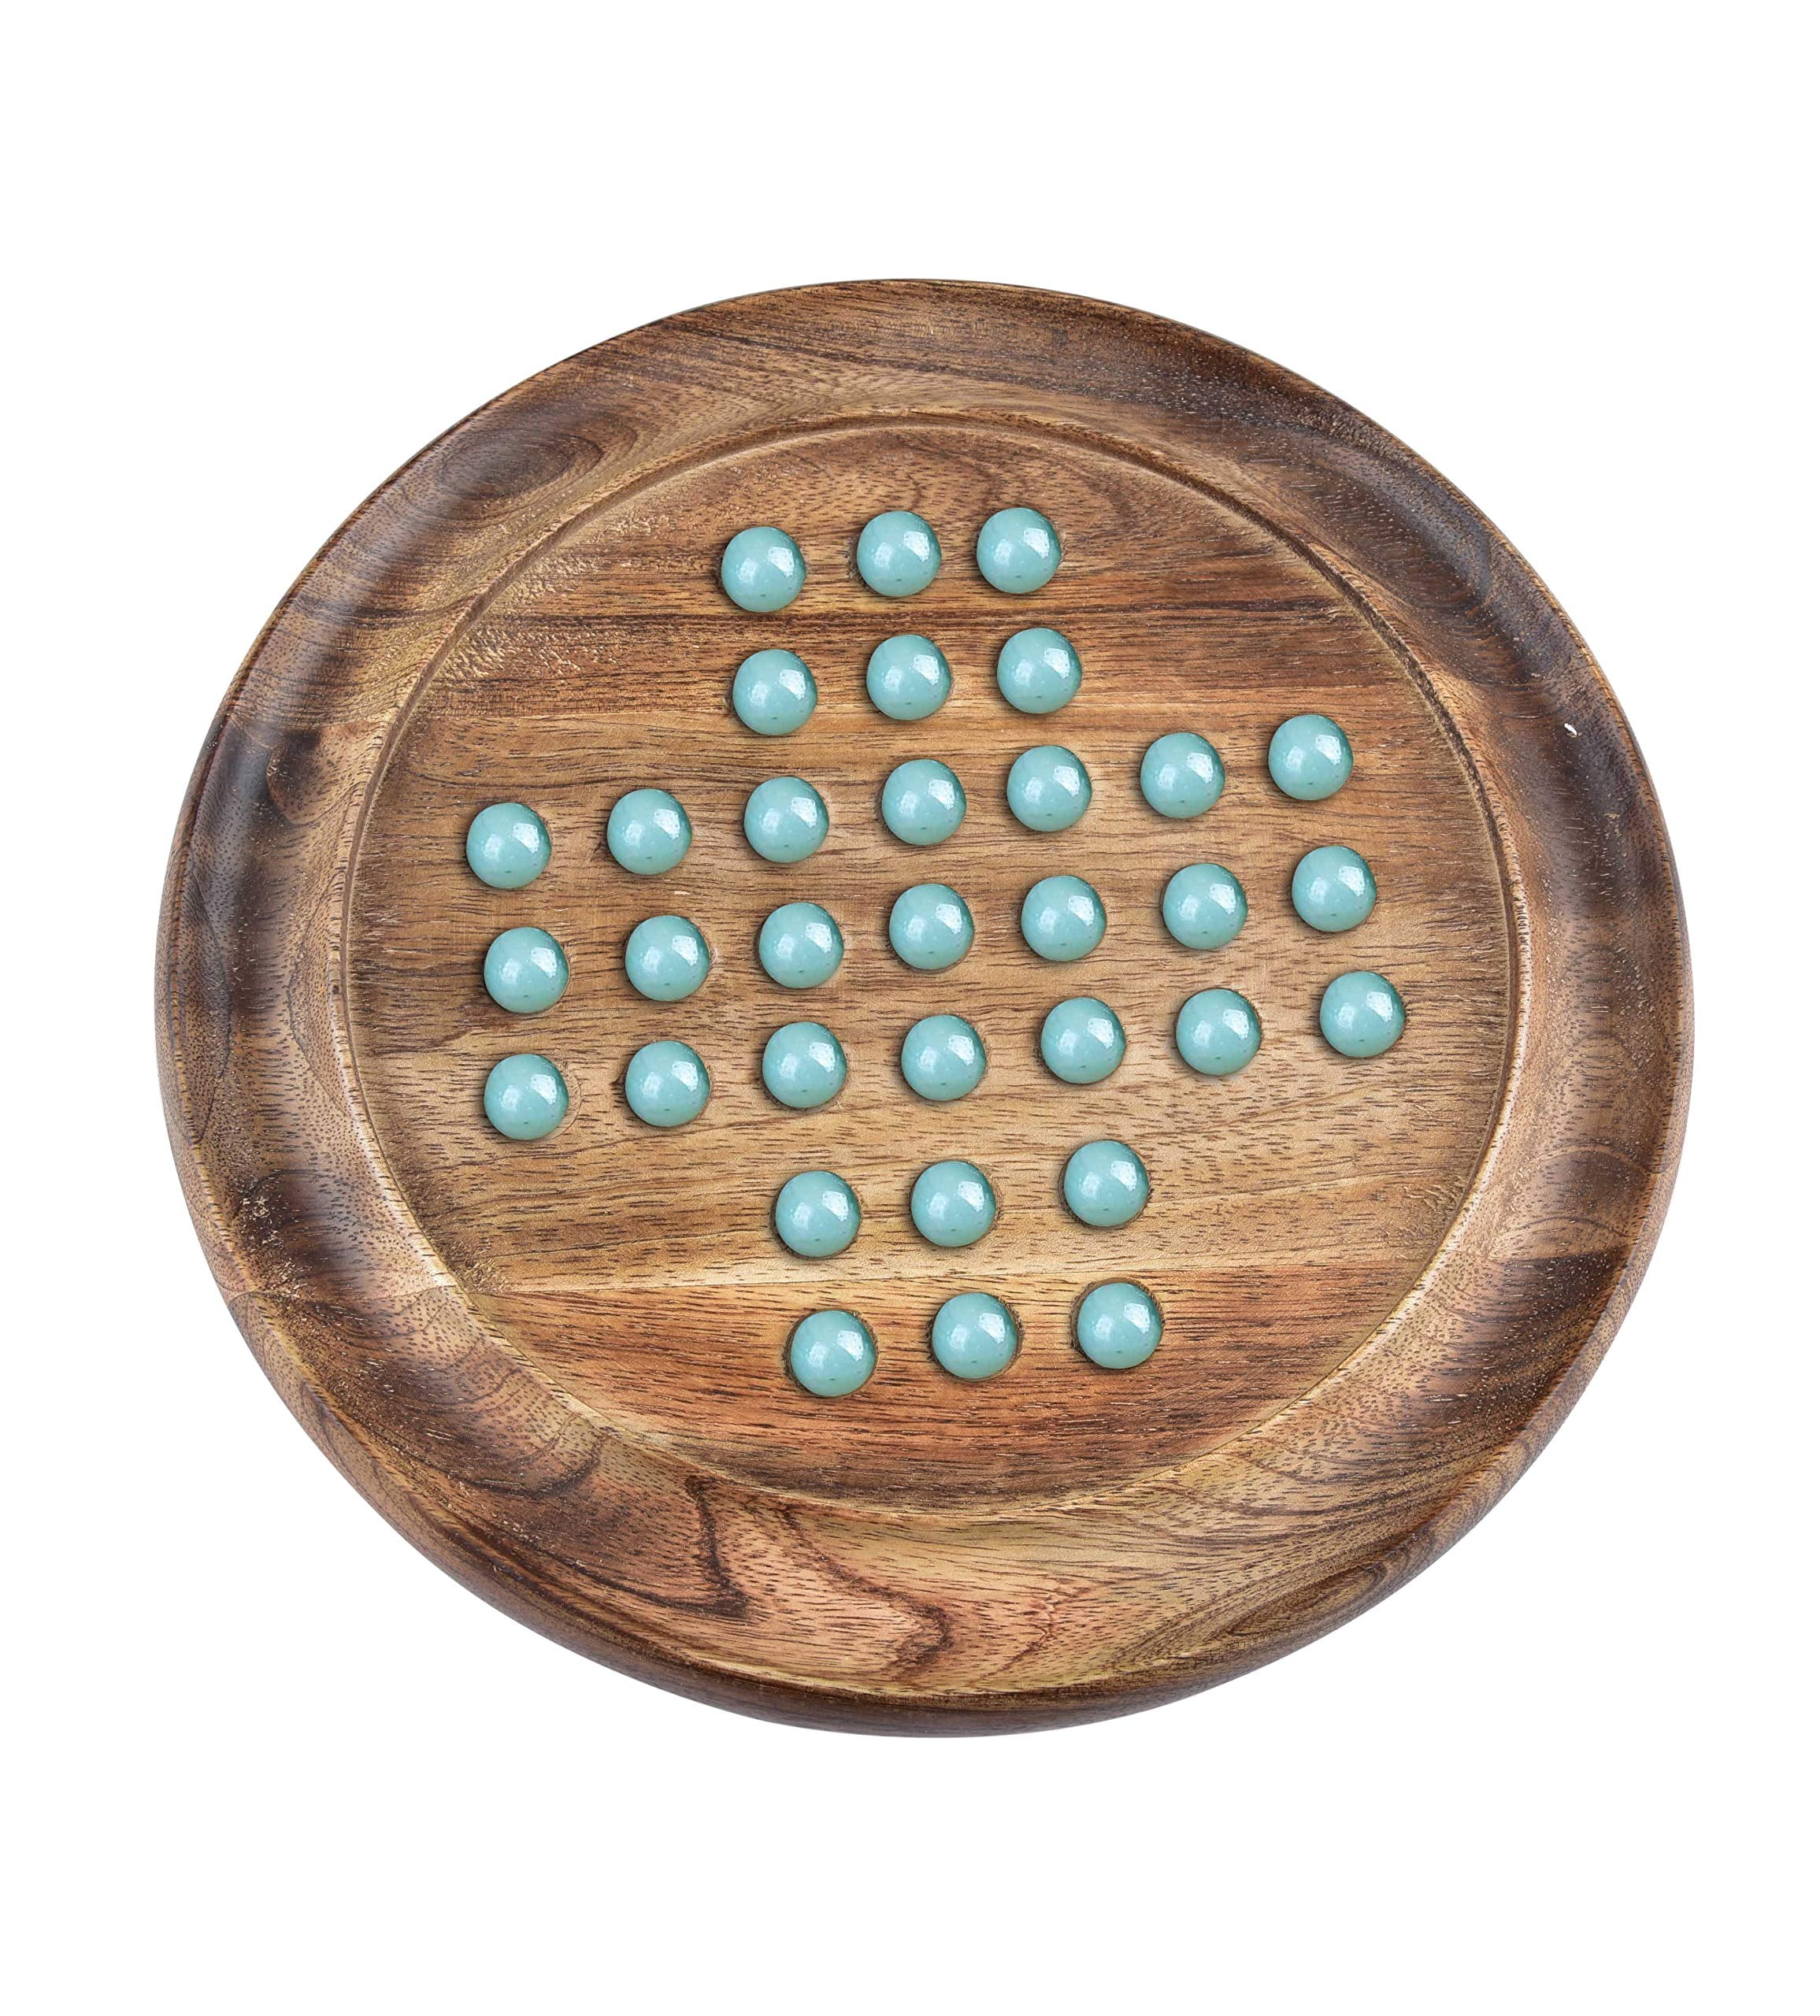 Details about   Wooden Games Solitaire Board with Glass Marbles Brown US 